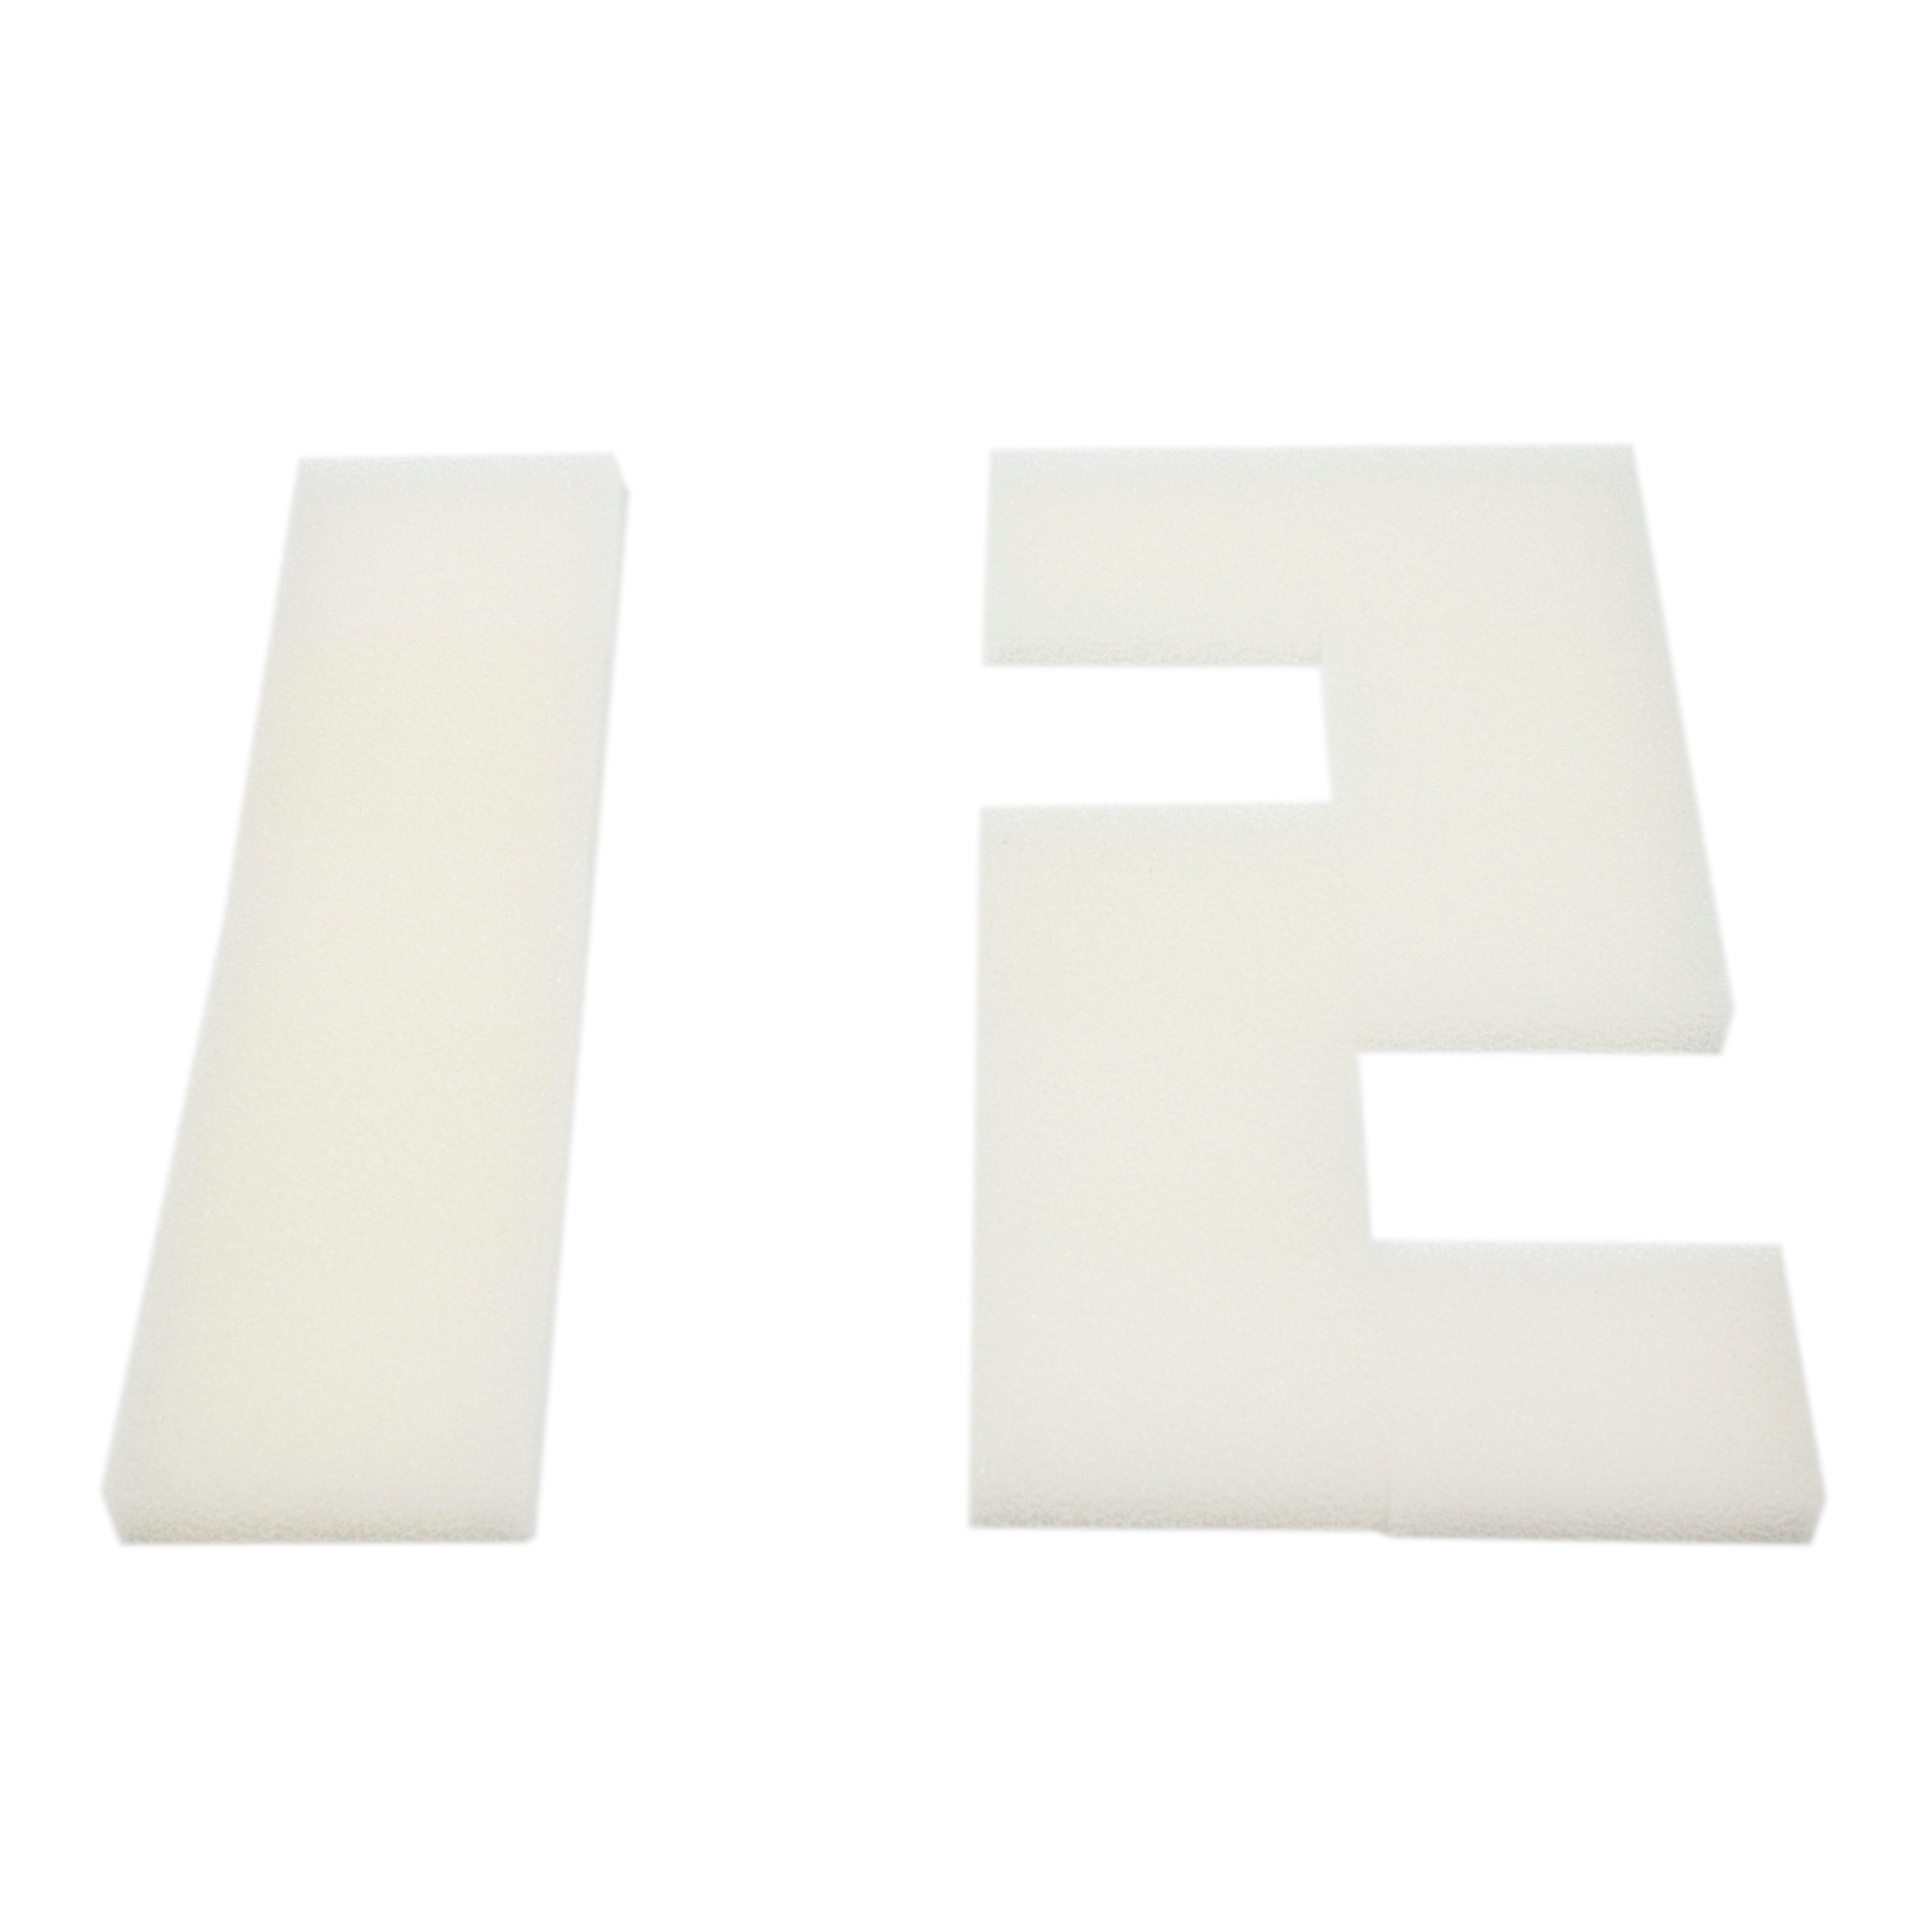 LTWHOME Compatible Foam Filters Suitable for Interpet Pf2 Internal Filter(Pack of 12)